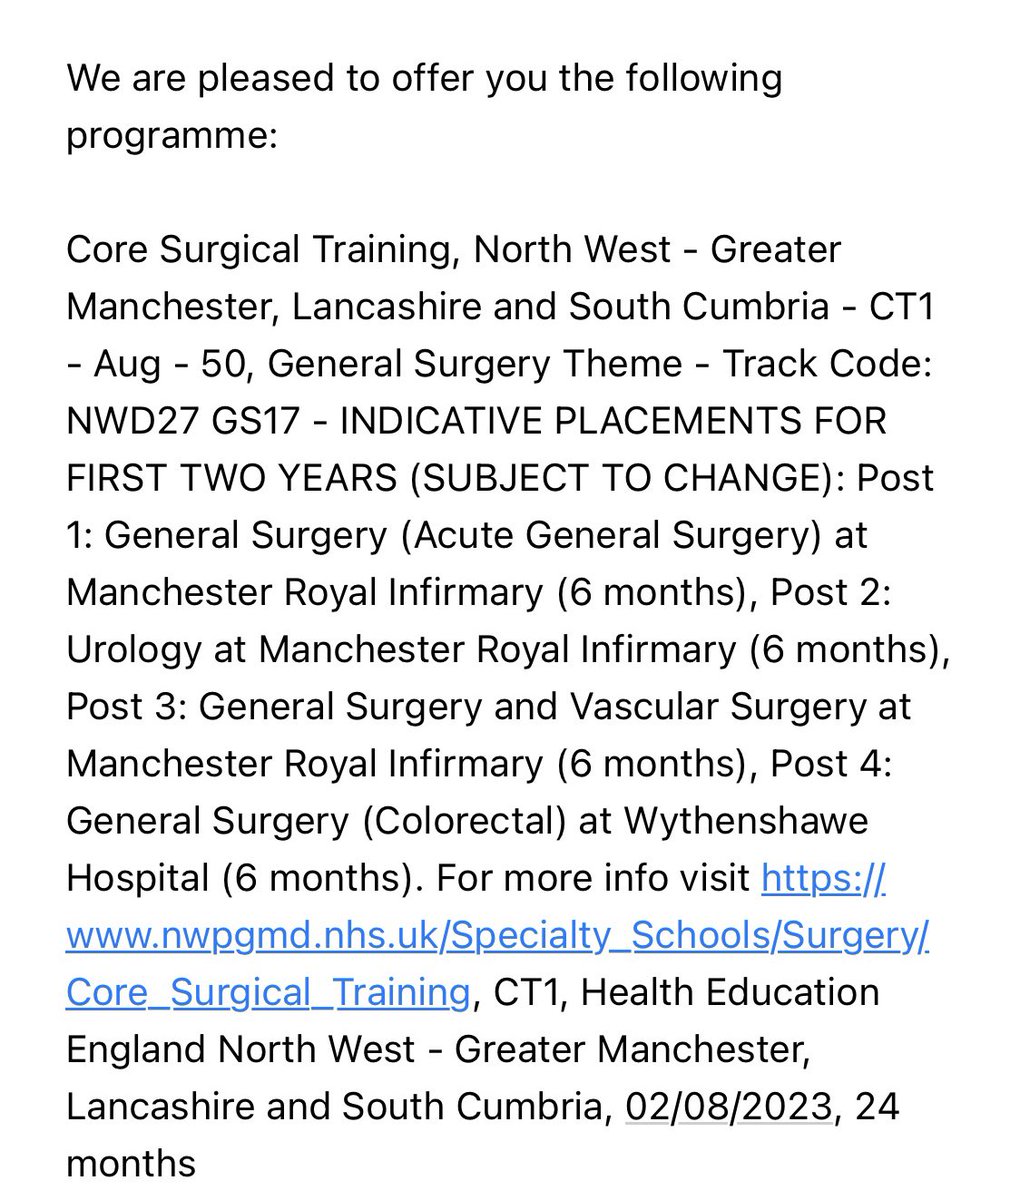 Over the moon to have landed my dream CST post in Manchester 🥹 #coresurgicaltraining #womeninsurgery